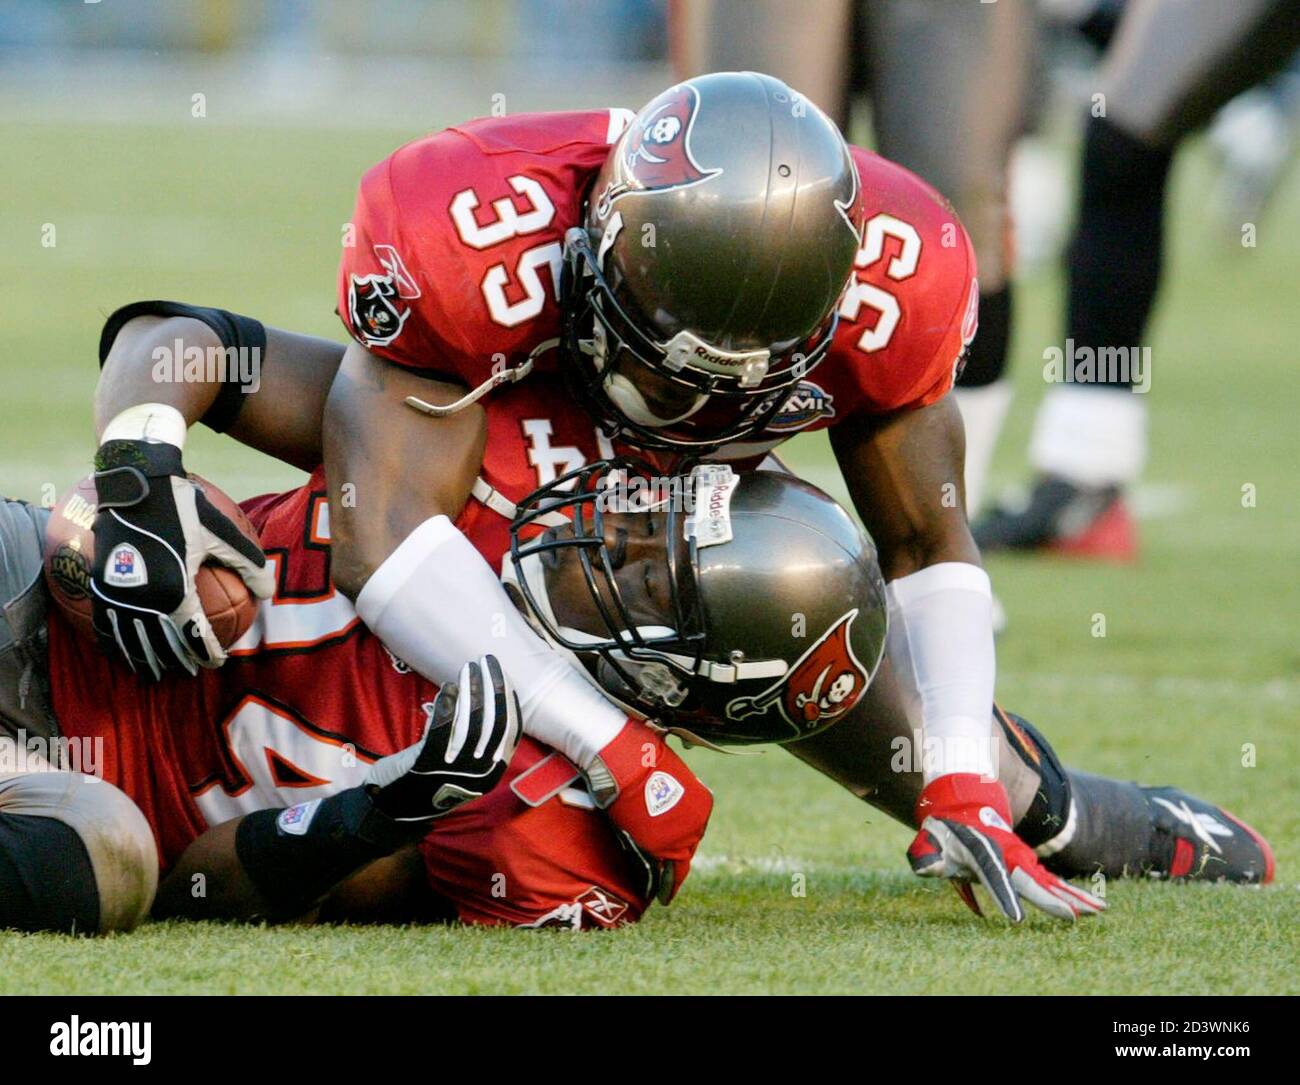 Tampa Bay Buccaneers' cornerback Corey Ivy (35) celebrates the second  interception of the game by teammate safety Dexter Jackson (on ground), in  the first half of Super Bowl XXXVII, in San Diego